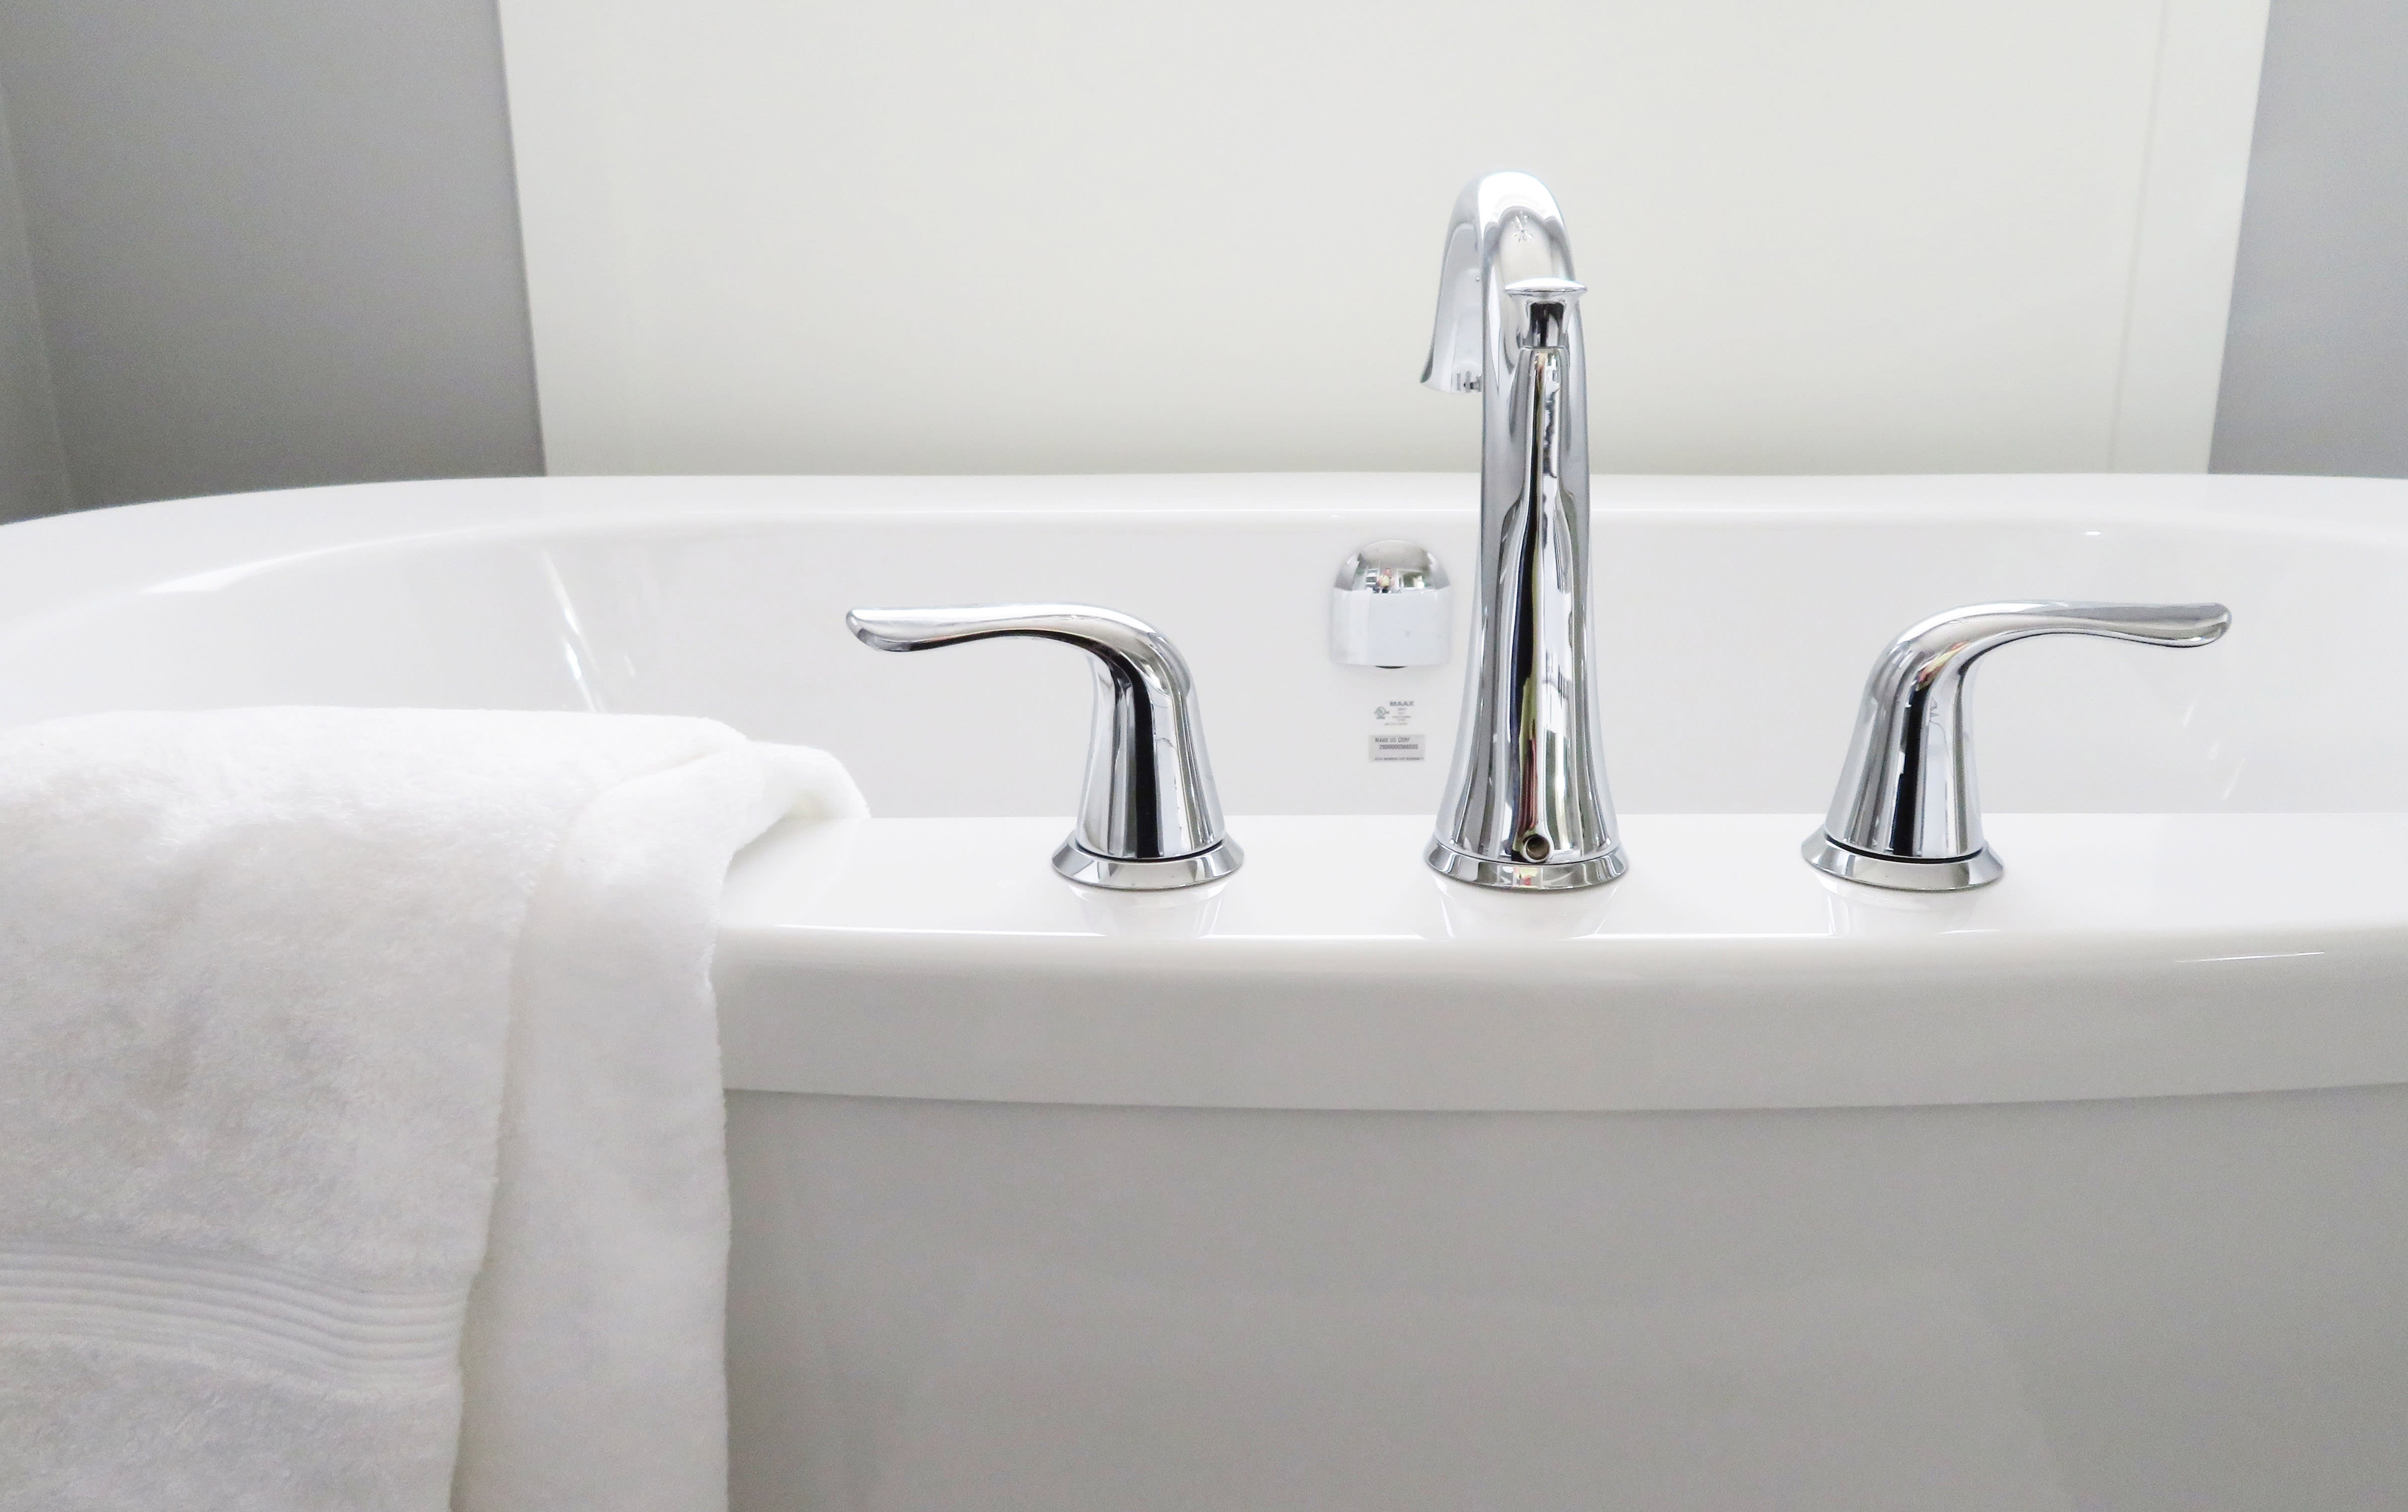 5 Ways To Clean An Old Porcelain Tub, Best Way To Clean Stained Porcelain Bathtub